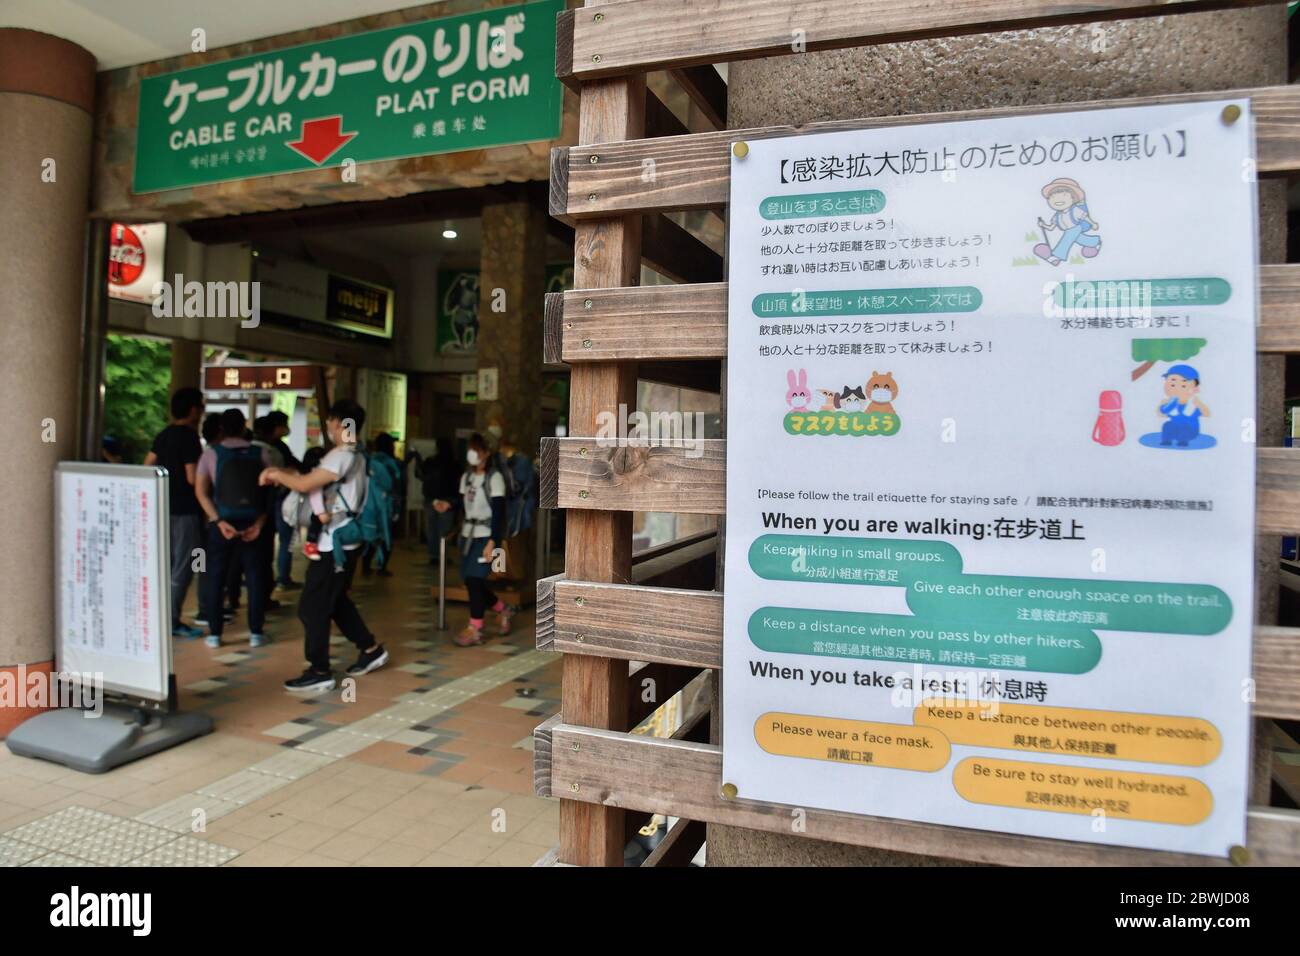 Sunday. 31st May, 2020. A notice displays at the Kiyotaki station in Hachioji, Tokyo, Japan on Sunday, May 31, 2020. Credit: AFLO/Alamy Live News Stock Photo